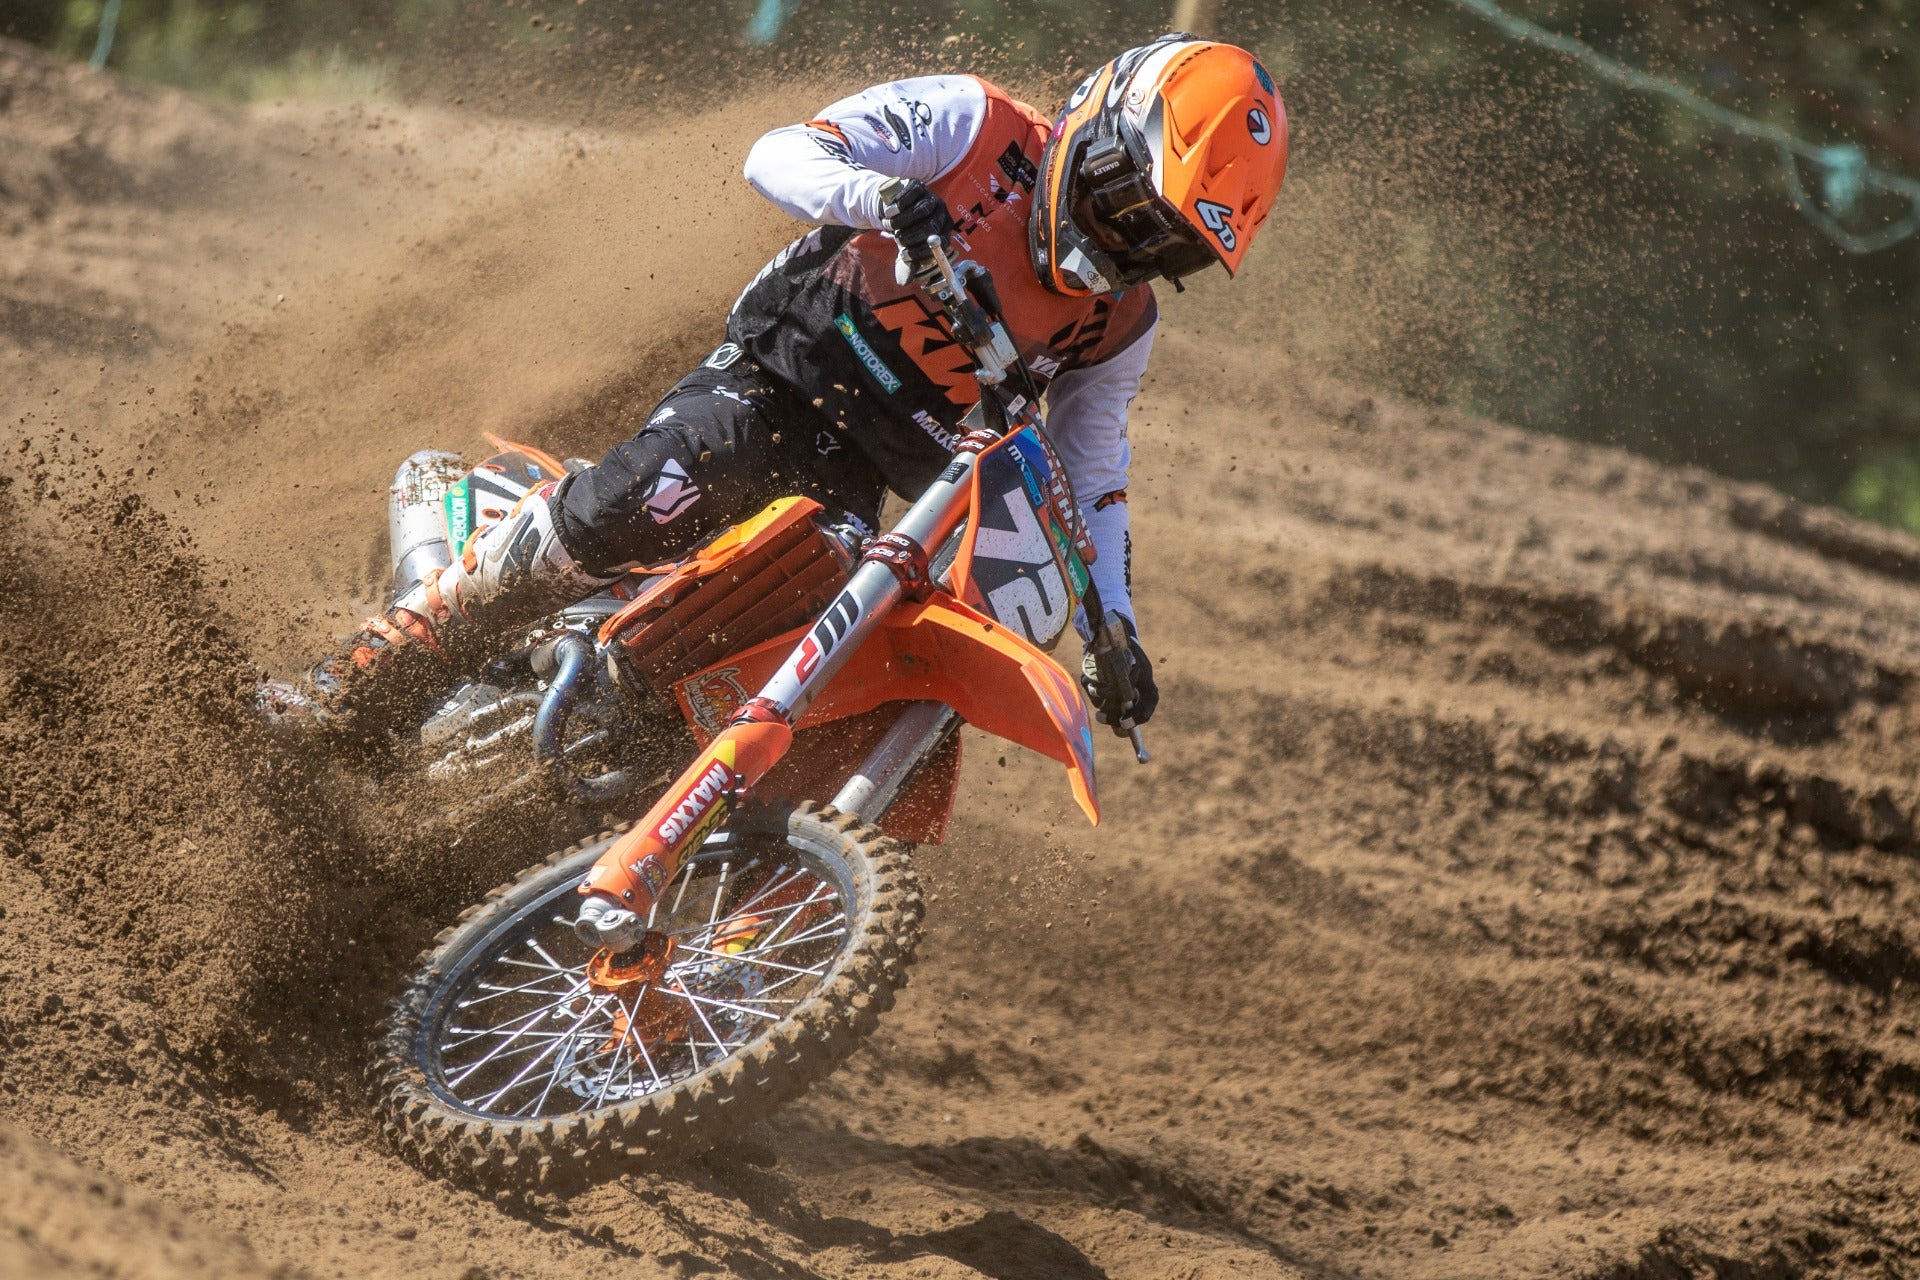 Liam Everts gets back on his bike after weeks of COVID-19 Lock-down!